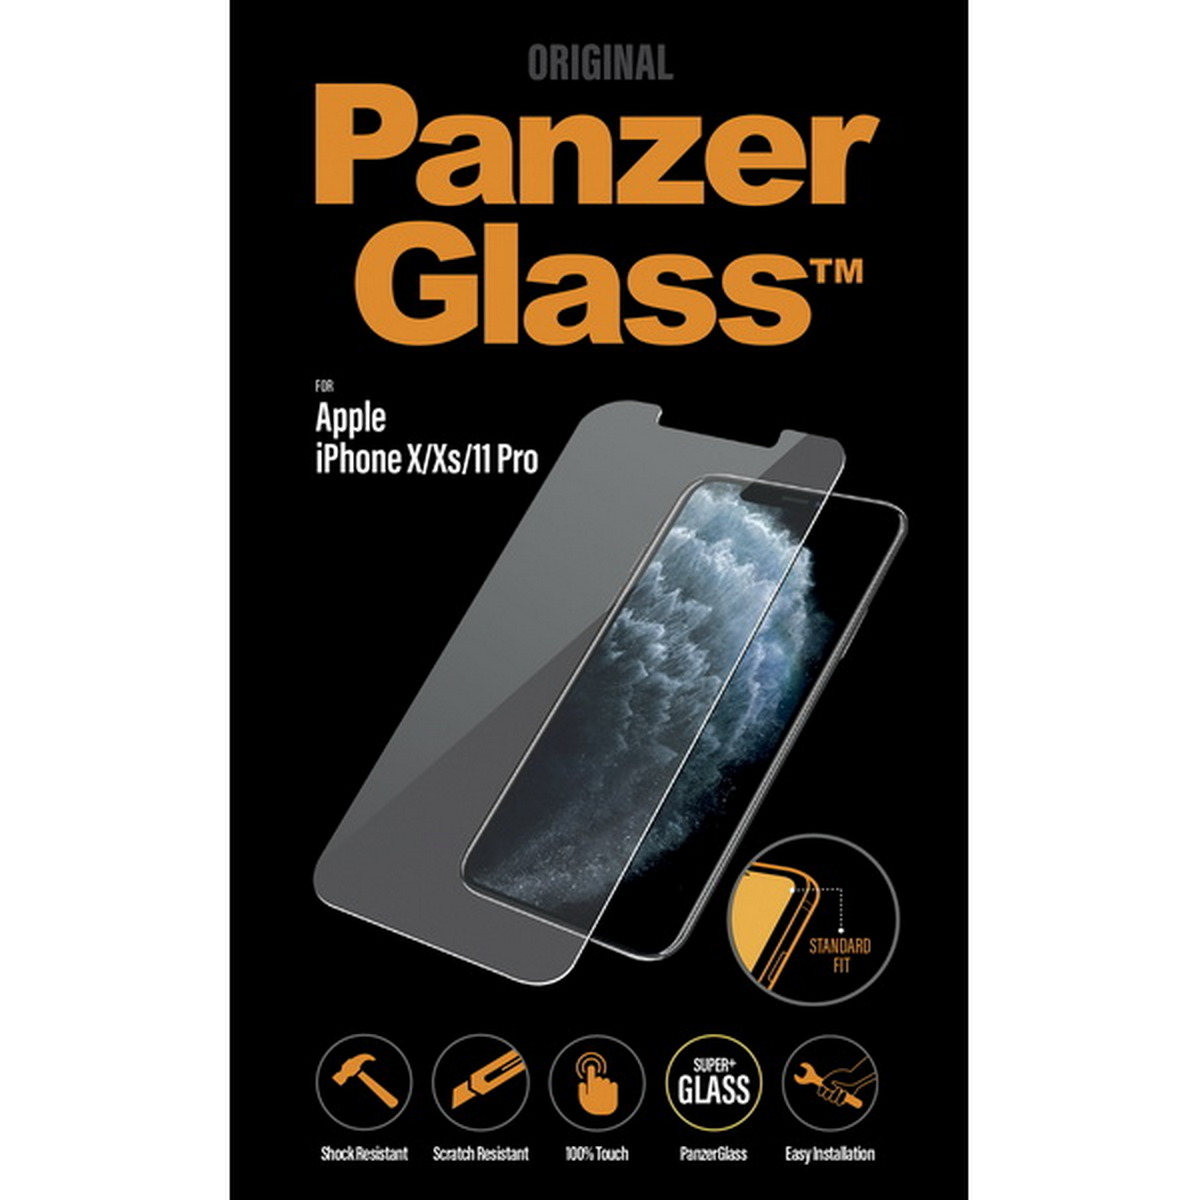 Panzerglass Film for iPhone X/XS/11 Pro Tempered Glass-Clear 2661